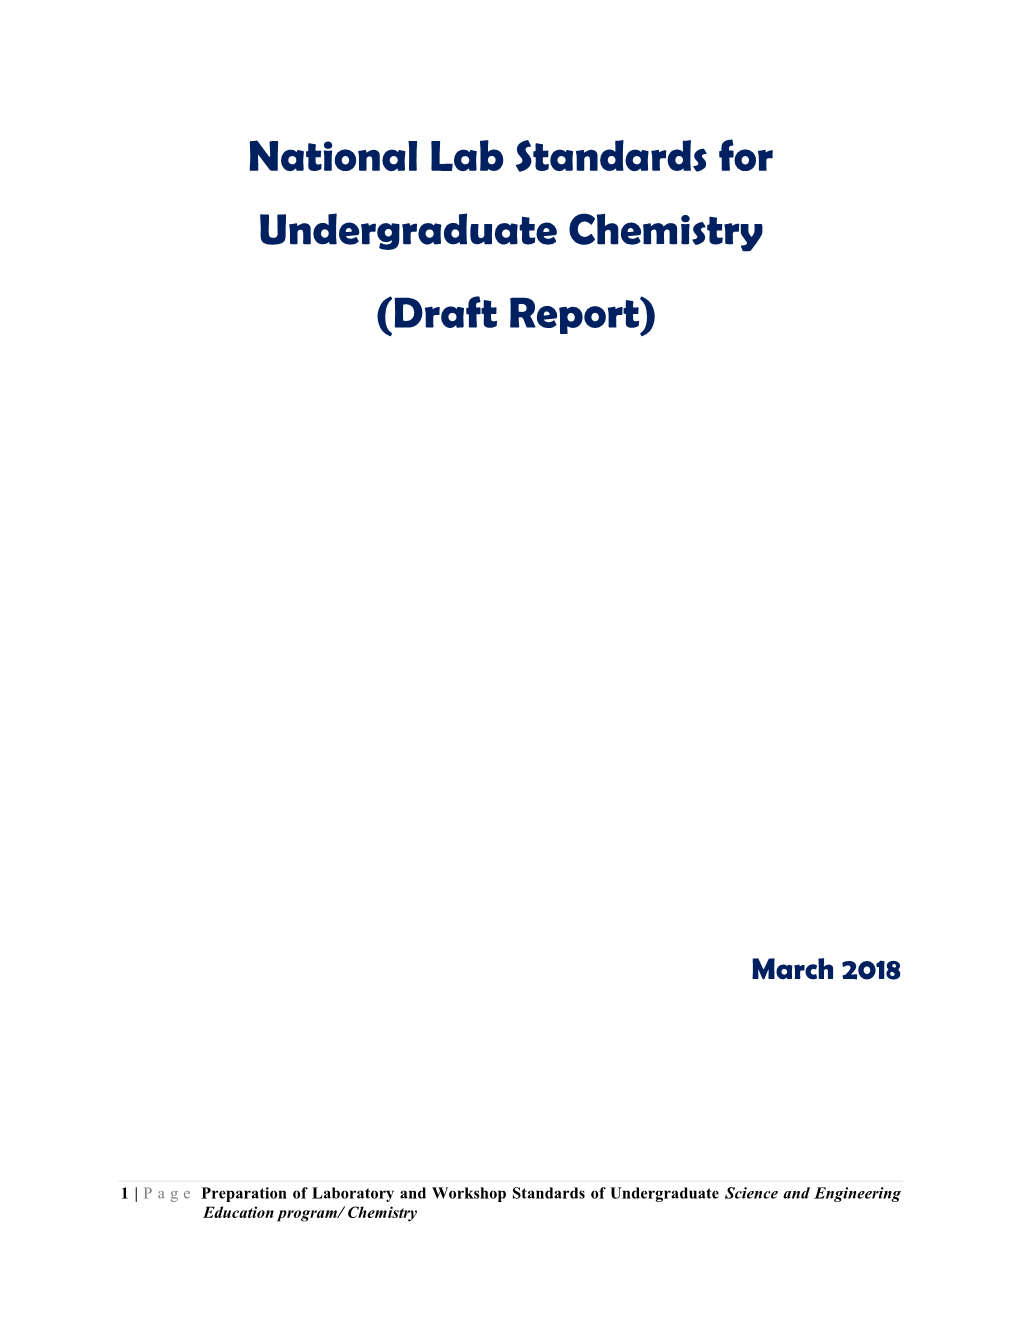 National Lab Standards for Undergraduate Chemistry (Draft Report)